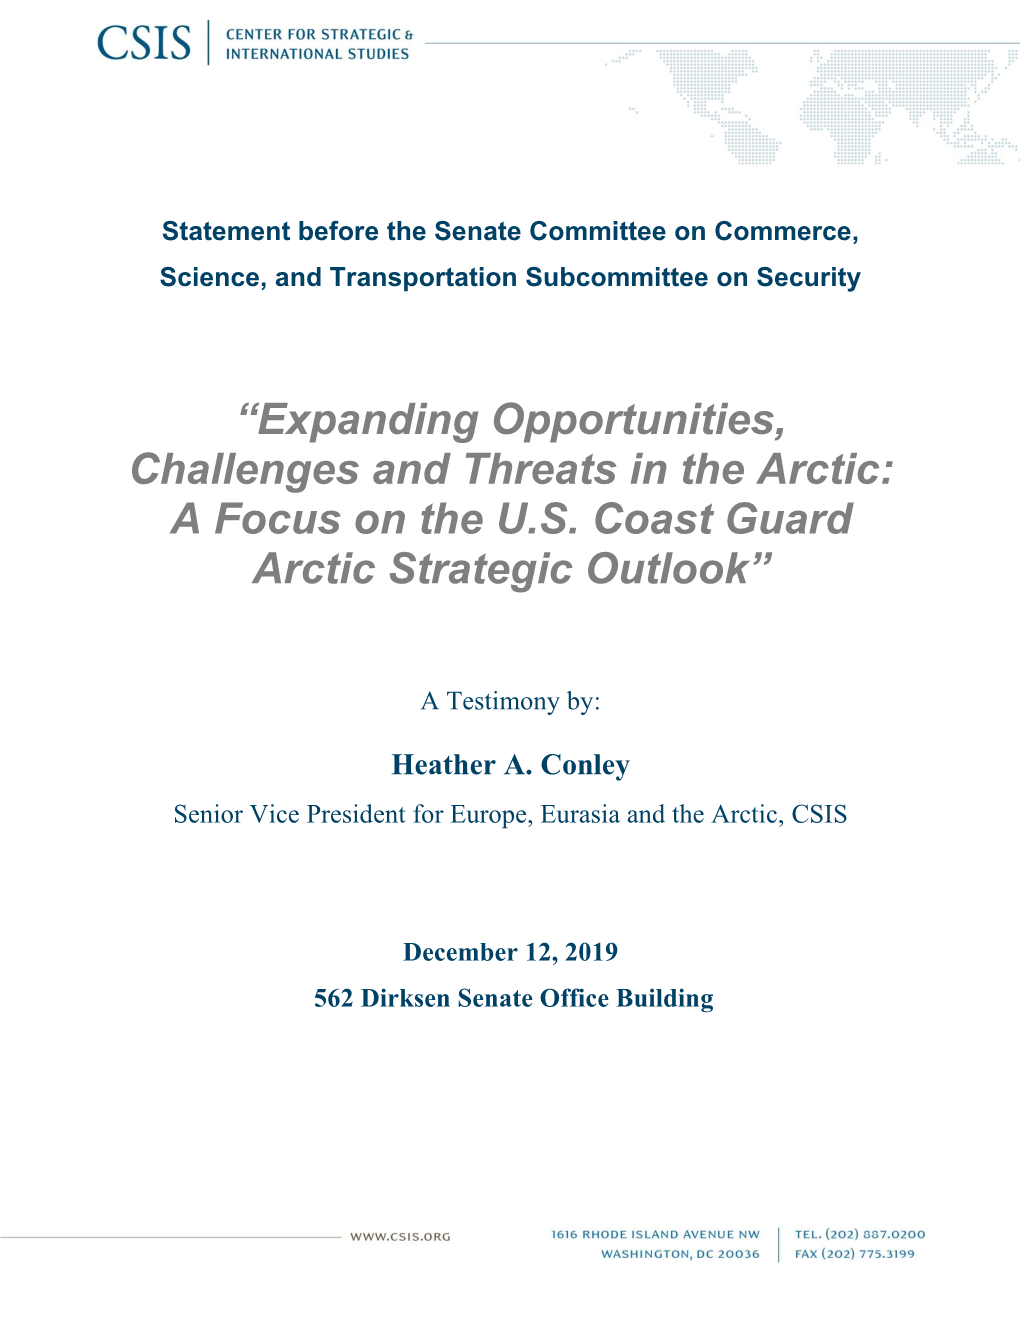 Expanding Opportunities, Challenges and Threats in the Arctic: a Focus on the U.S